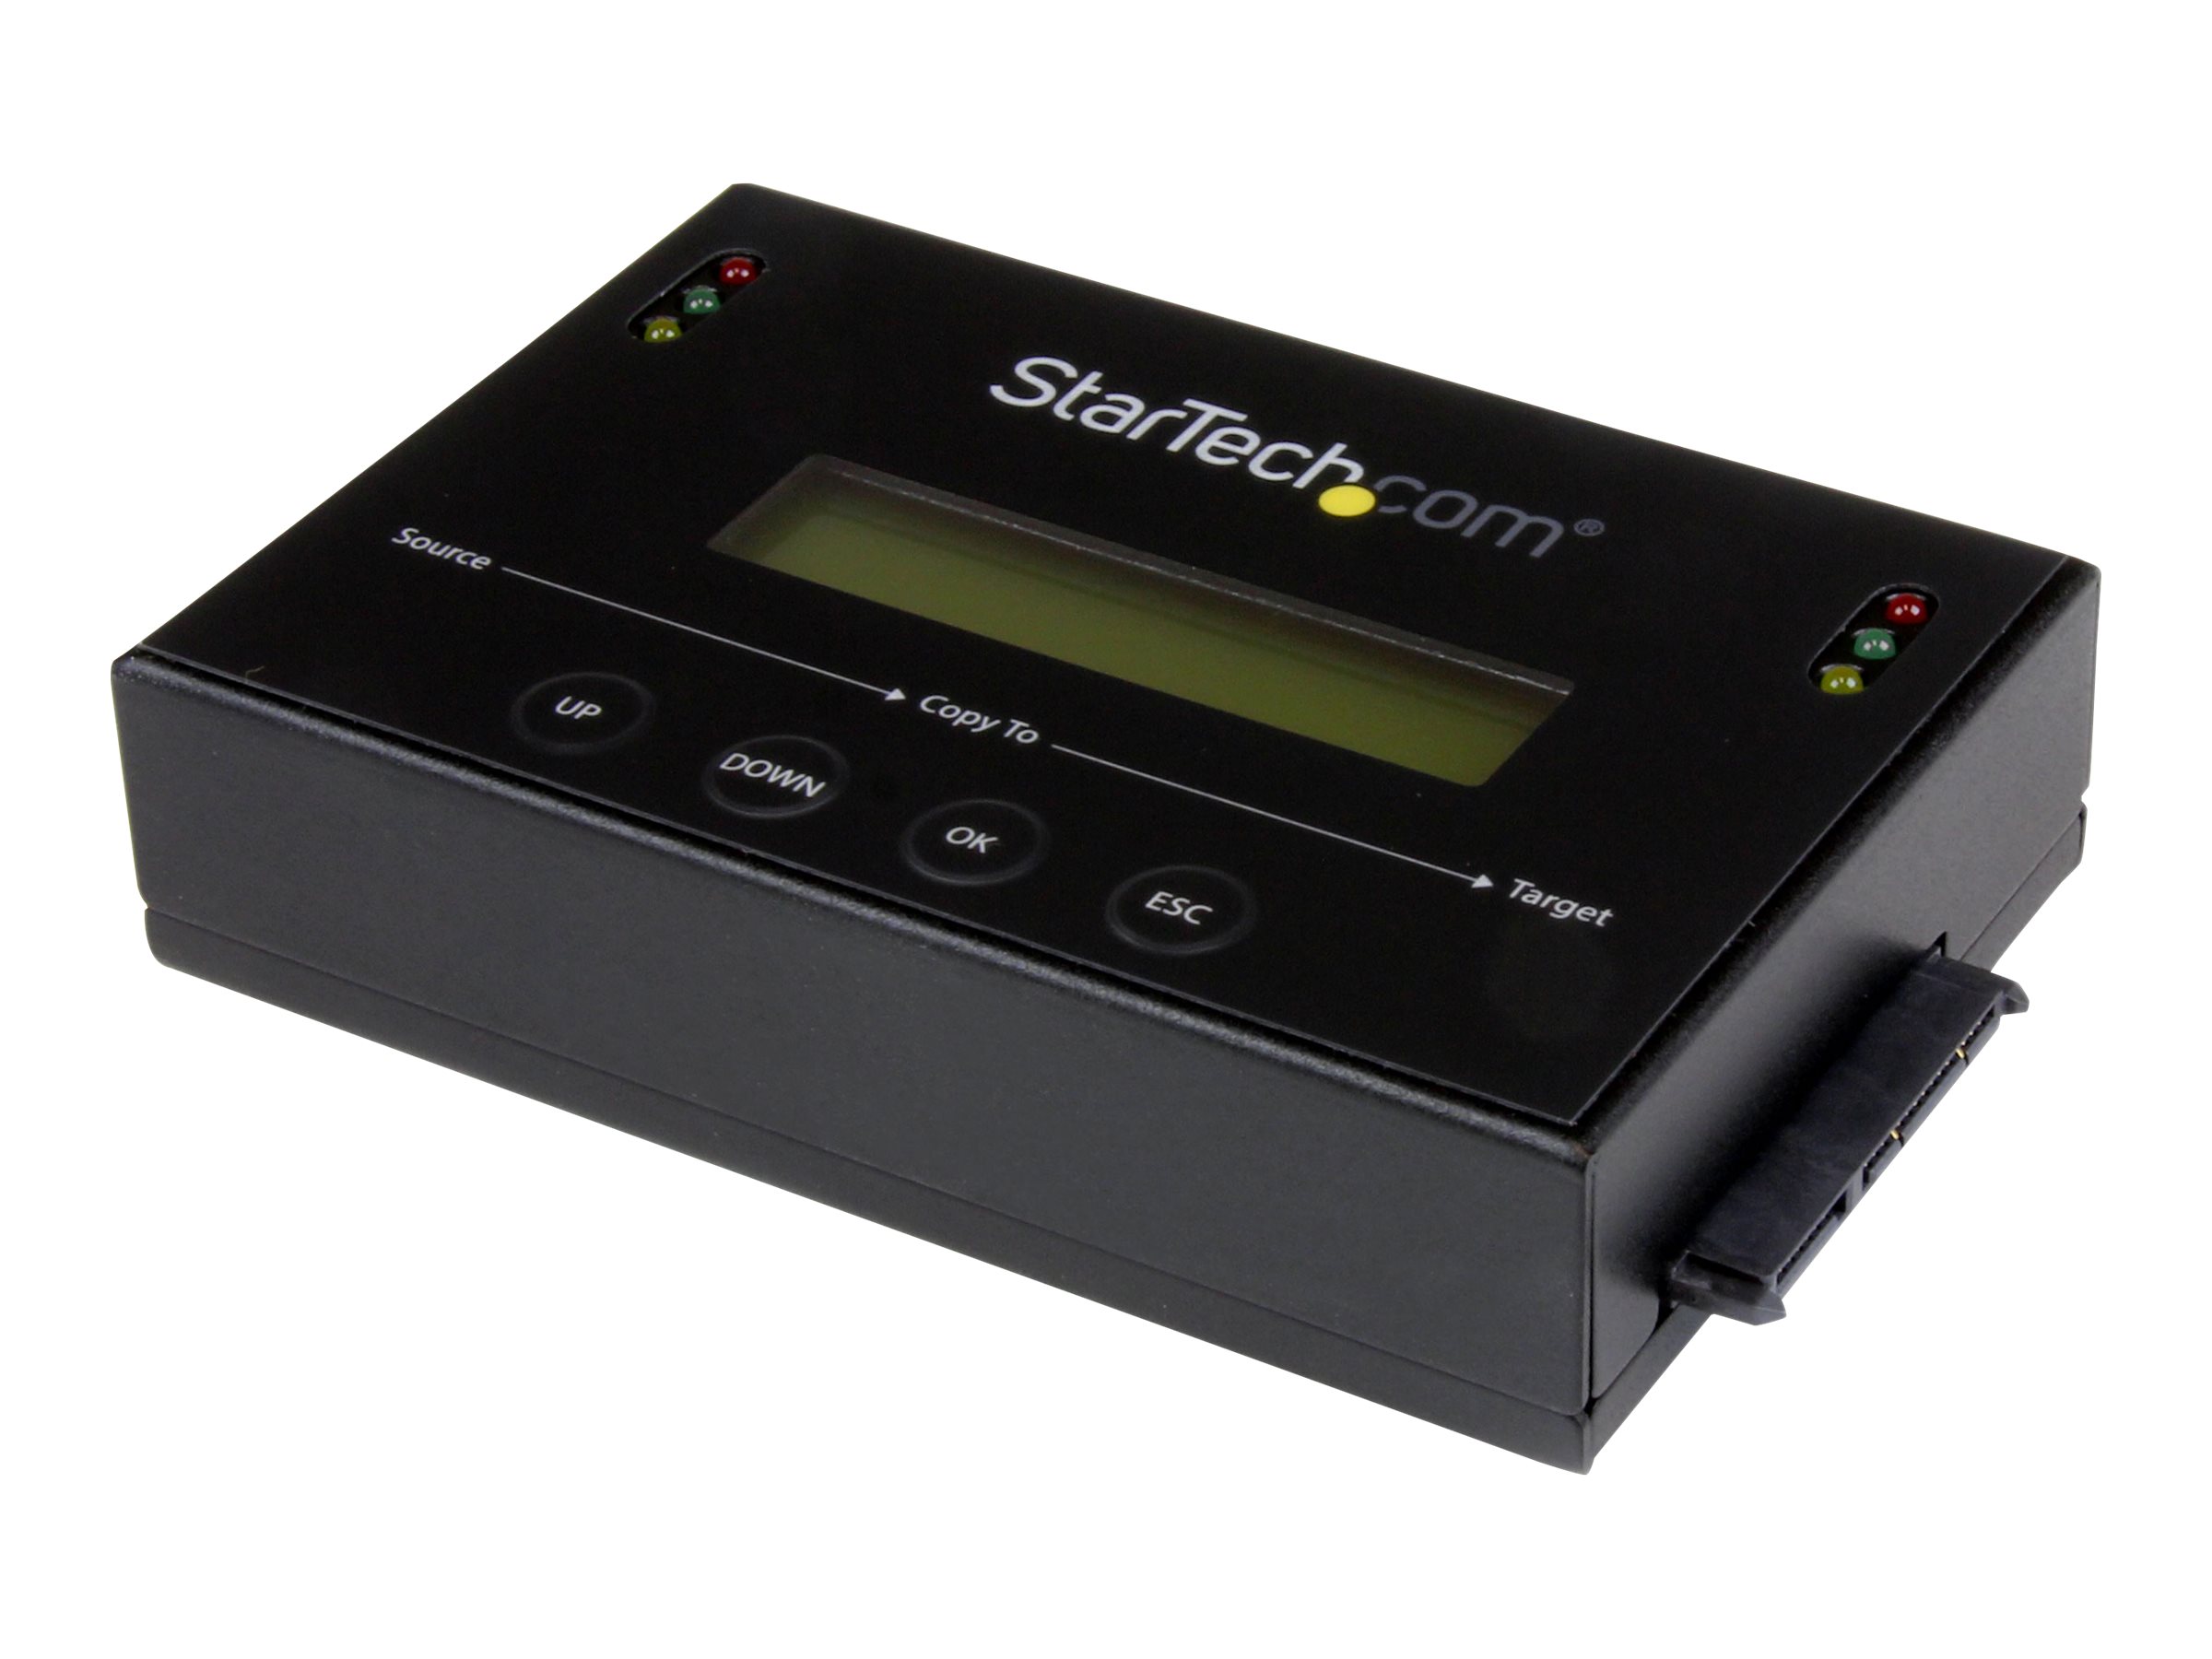 StarTech.com 11 Standalone Hard Drive Duplicator with Disk Image Library Manager For Backup & Restore, Store Several Images on one 2.53.5 SATA Drive, HDDSSD Cloner, No PC Required - TAA Compliant - Festplattenduplikator - 2 Schächte (SATA-600) - fü...